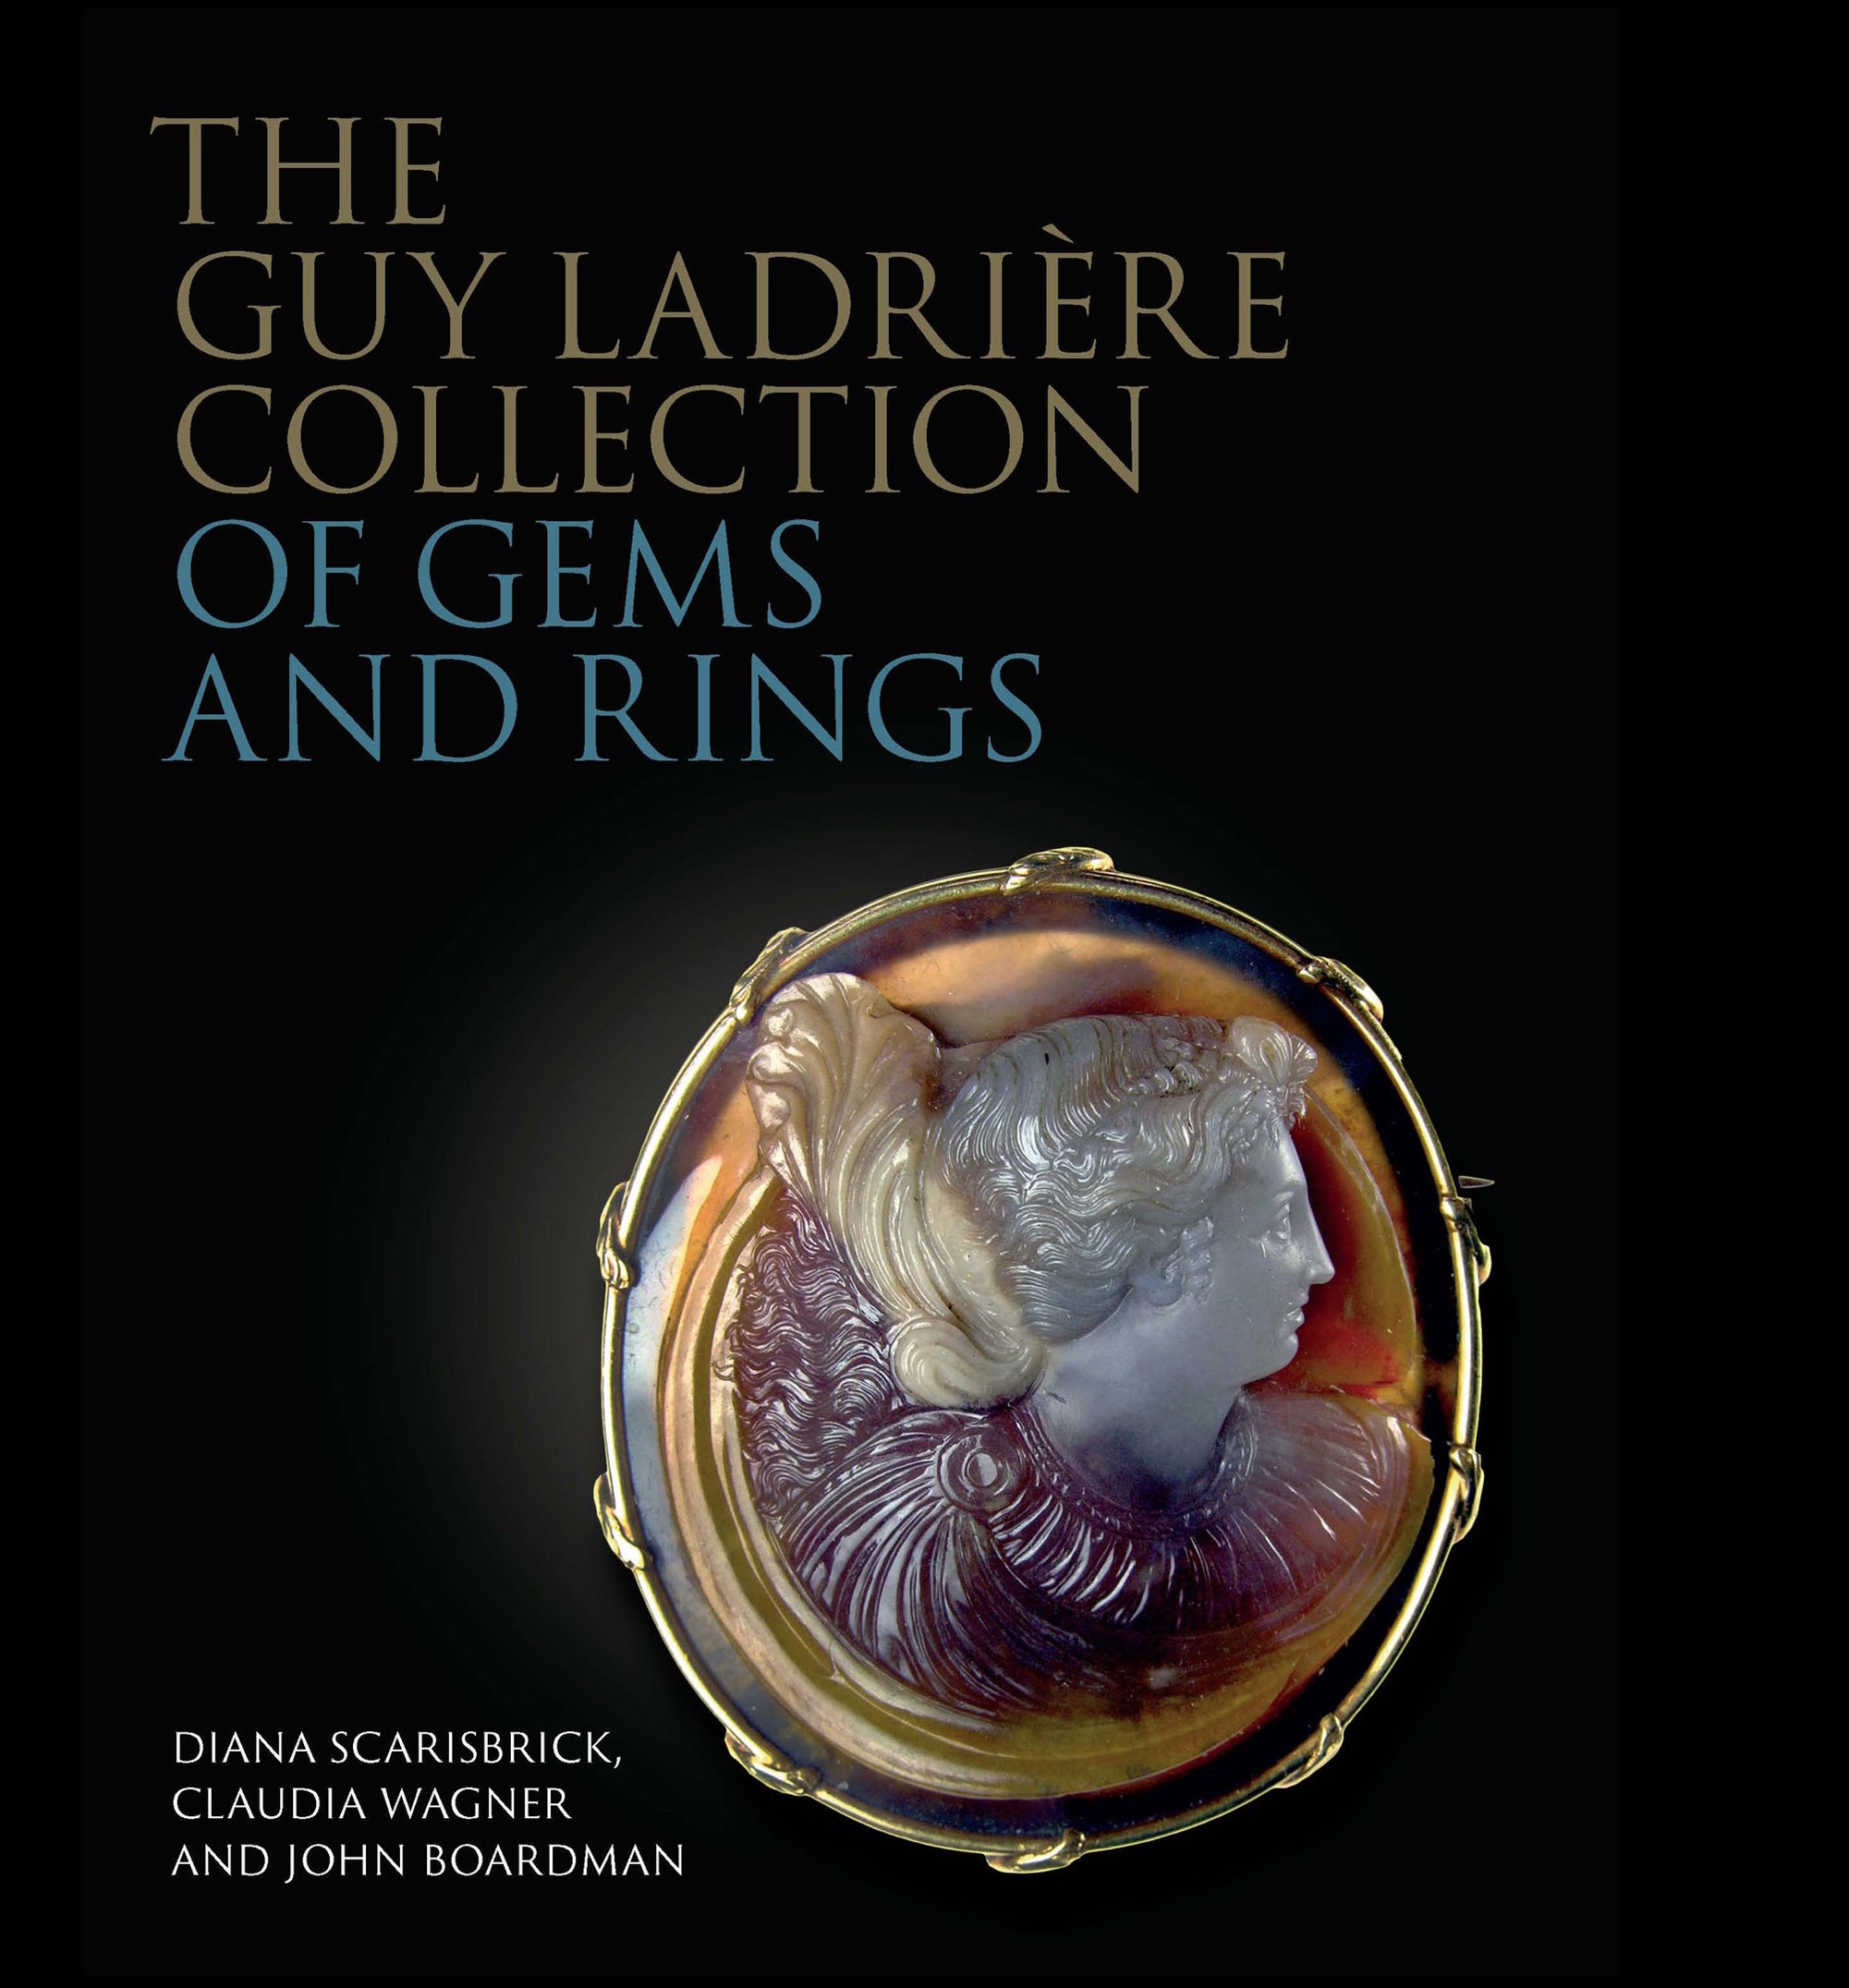 The Ladrière Collection of Gems and Rings